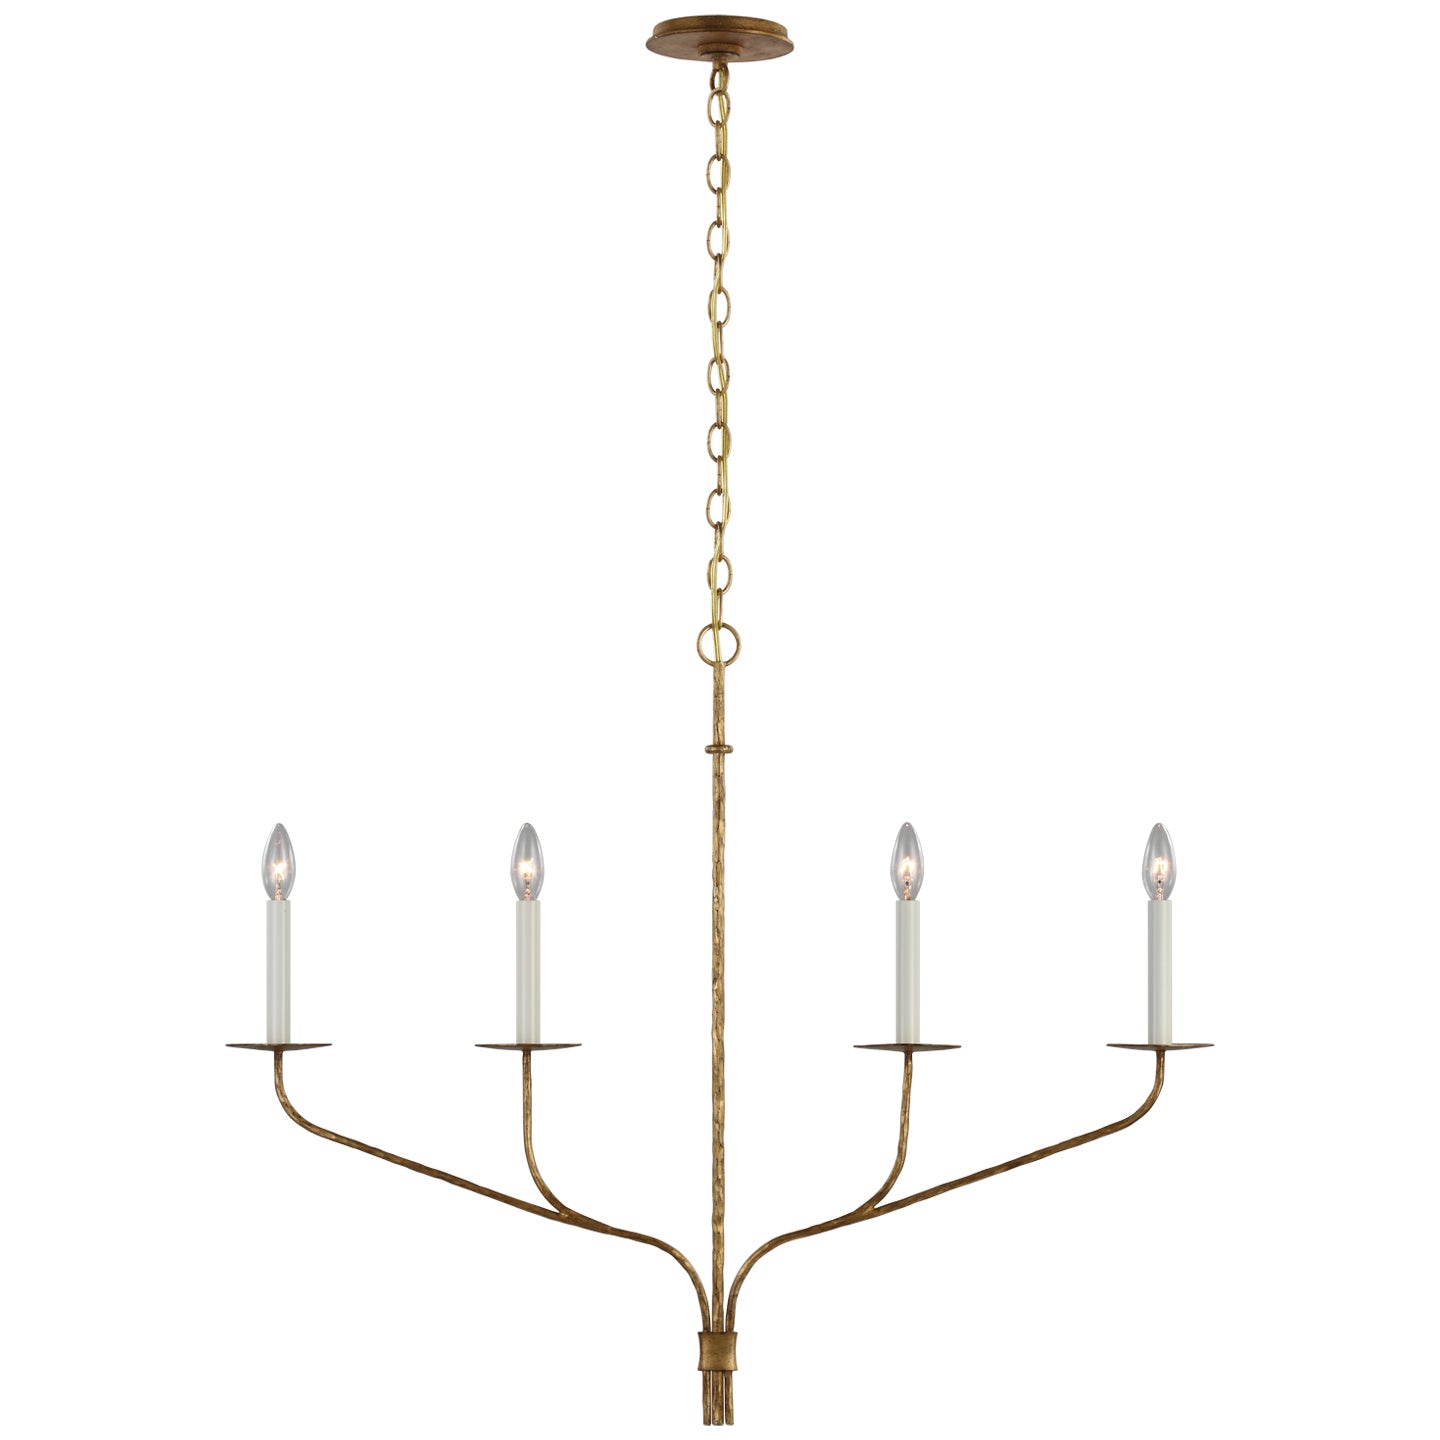 Load image into Gallery viewer, Visual Comfort Signature - S 5750GI - LED Linear Chandelier - Belfair - Gilded Iron
